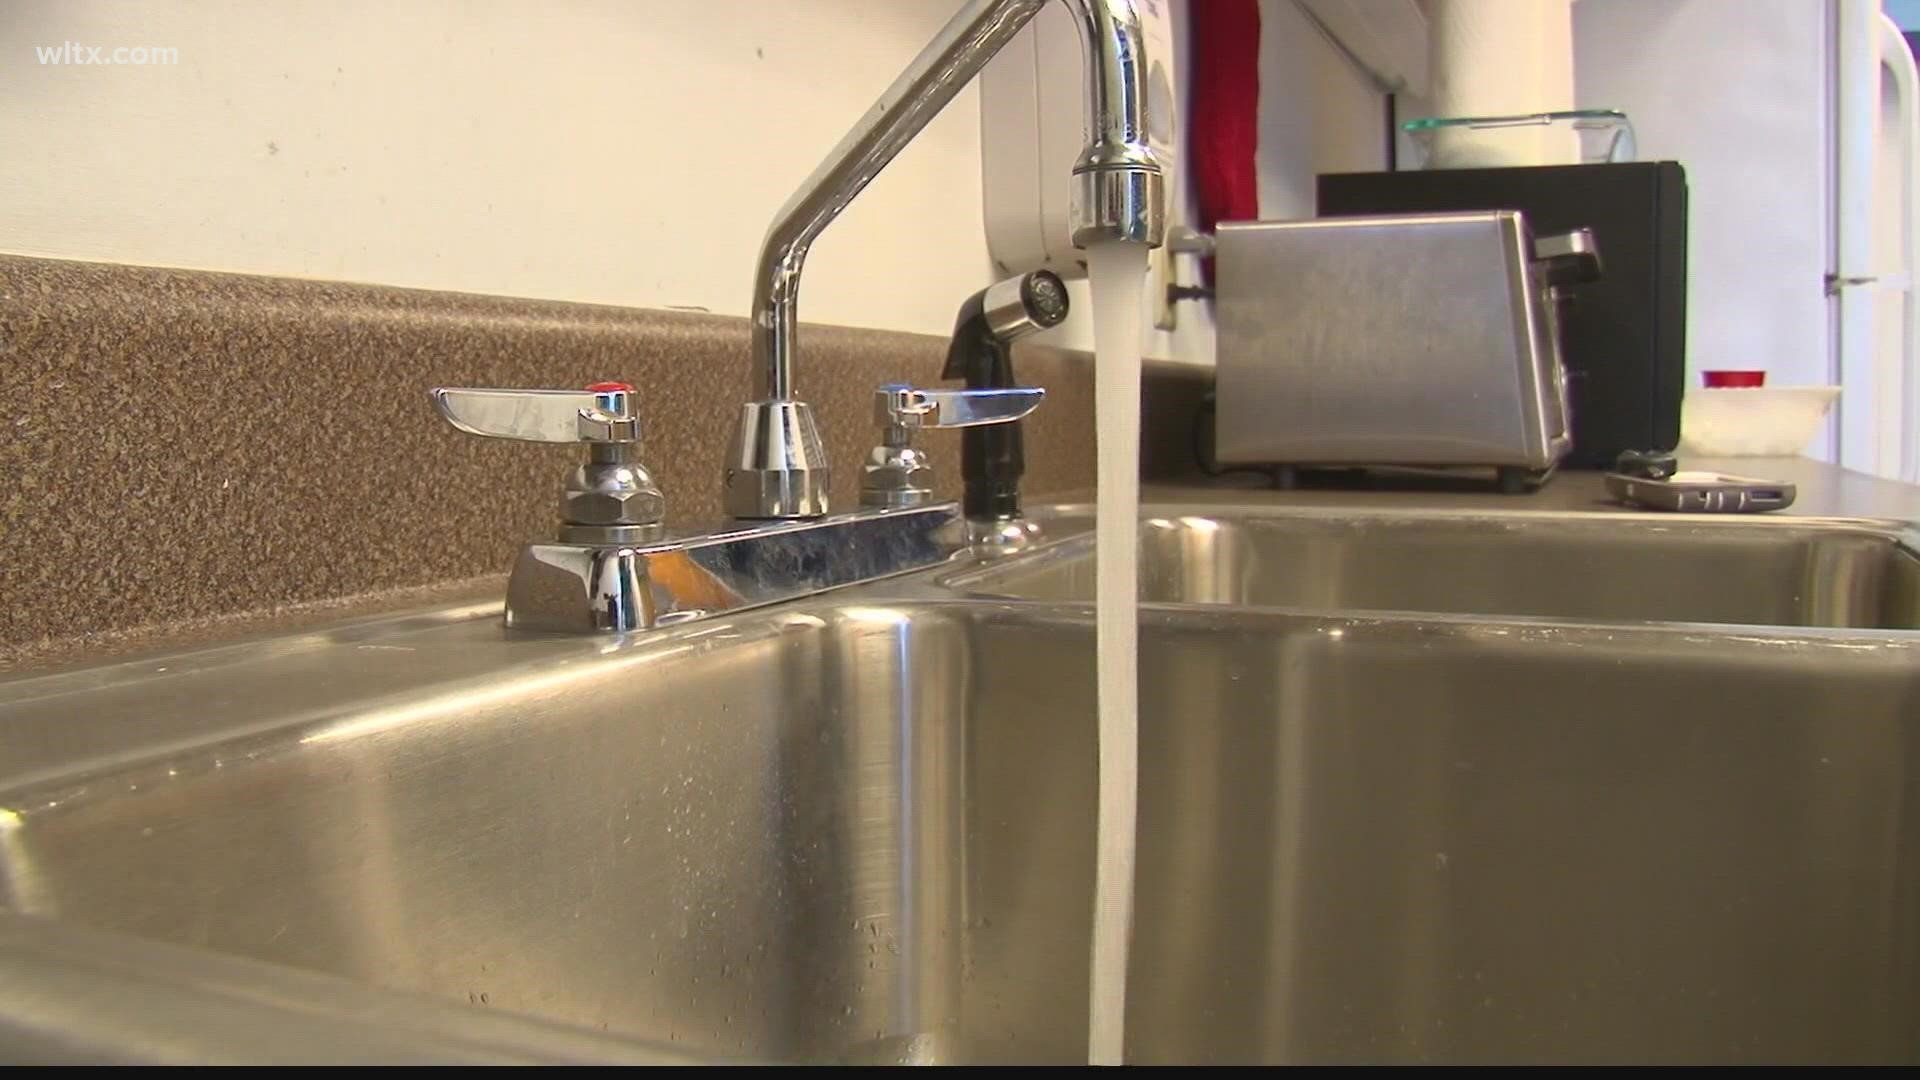 A Facebook post on the Town of Lexington's town page said that water customers may notice their water has a musty smell or taste. They are working to fix the issue.